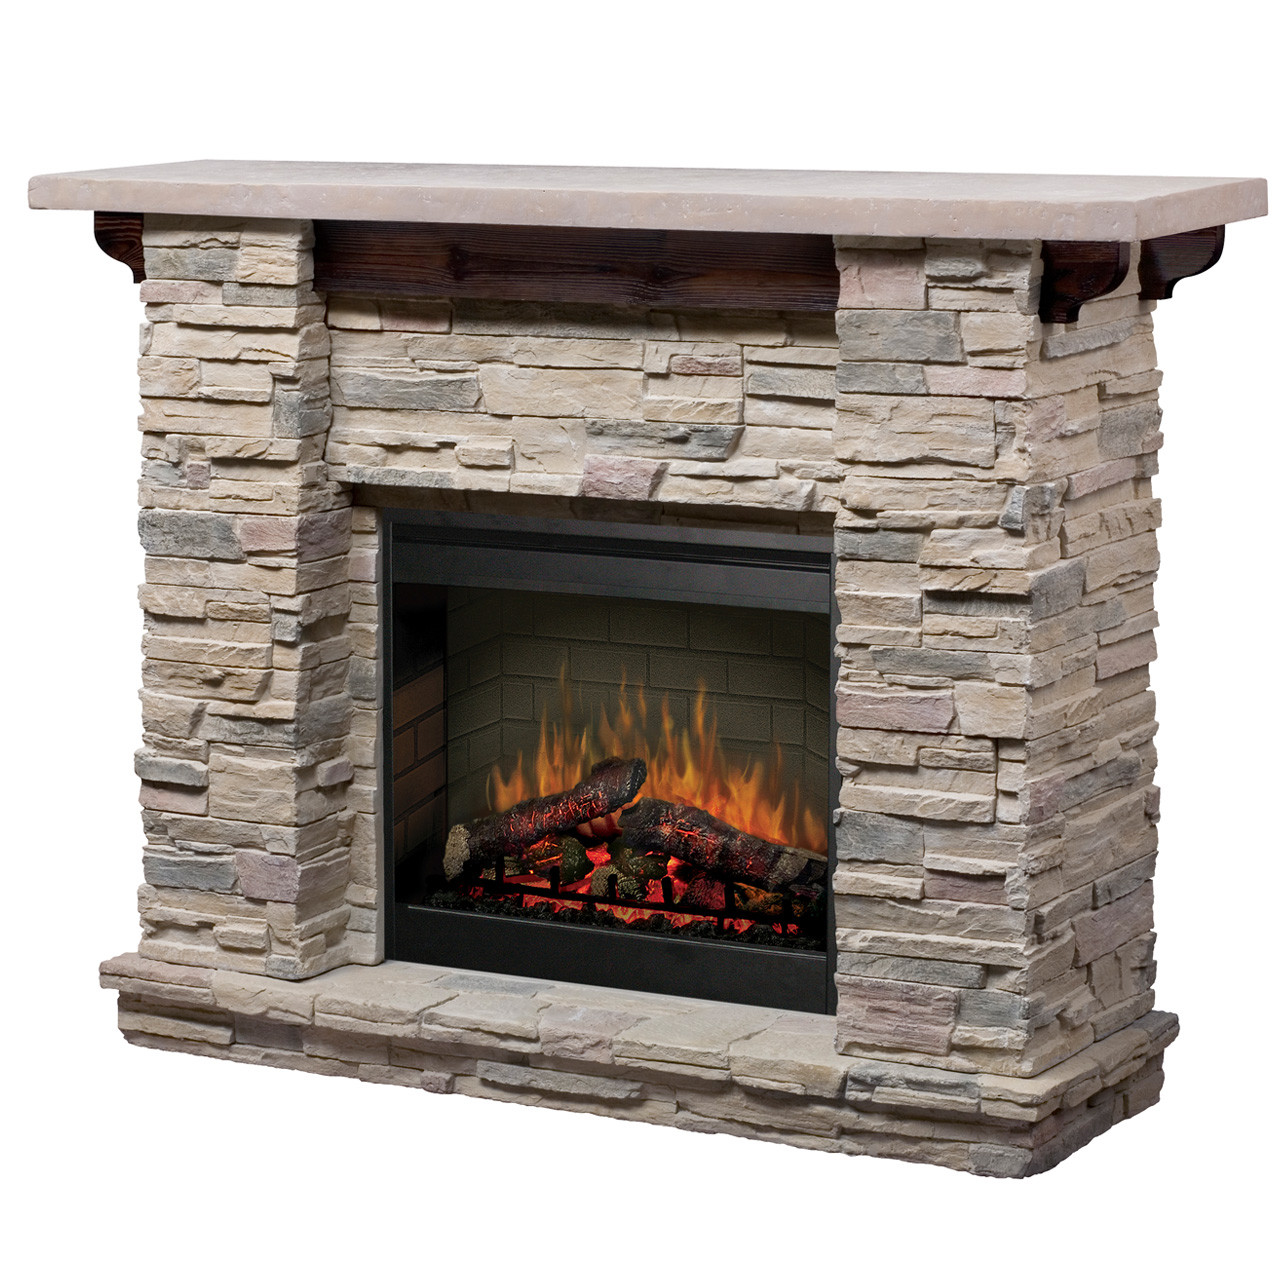 Rustic Electric Fireplace
 Electric Fireplaces Archives Page 2 of 3 Hot Tubs